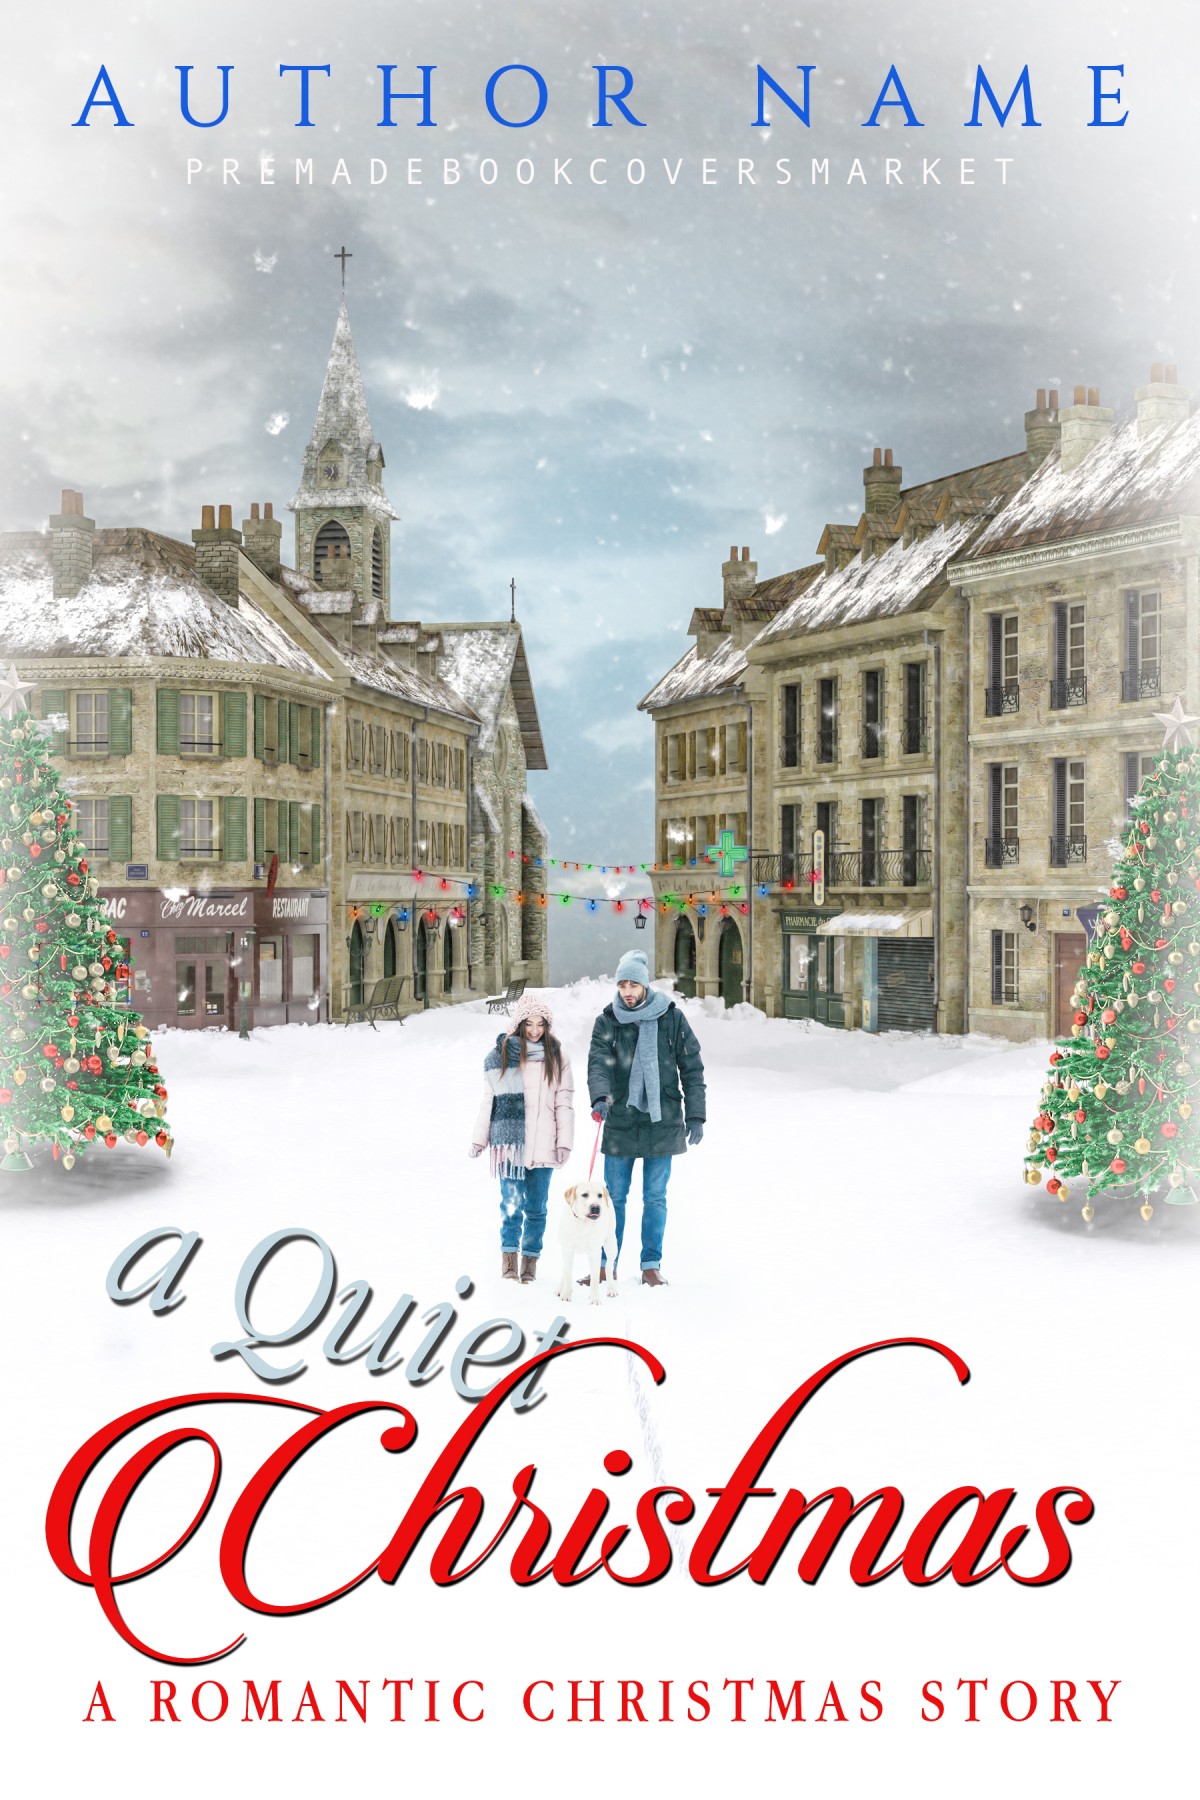 a nice quiet holiday pdf free download